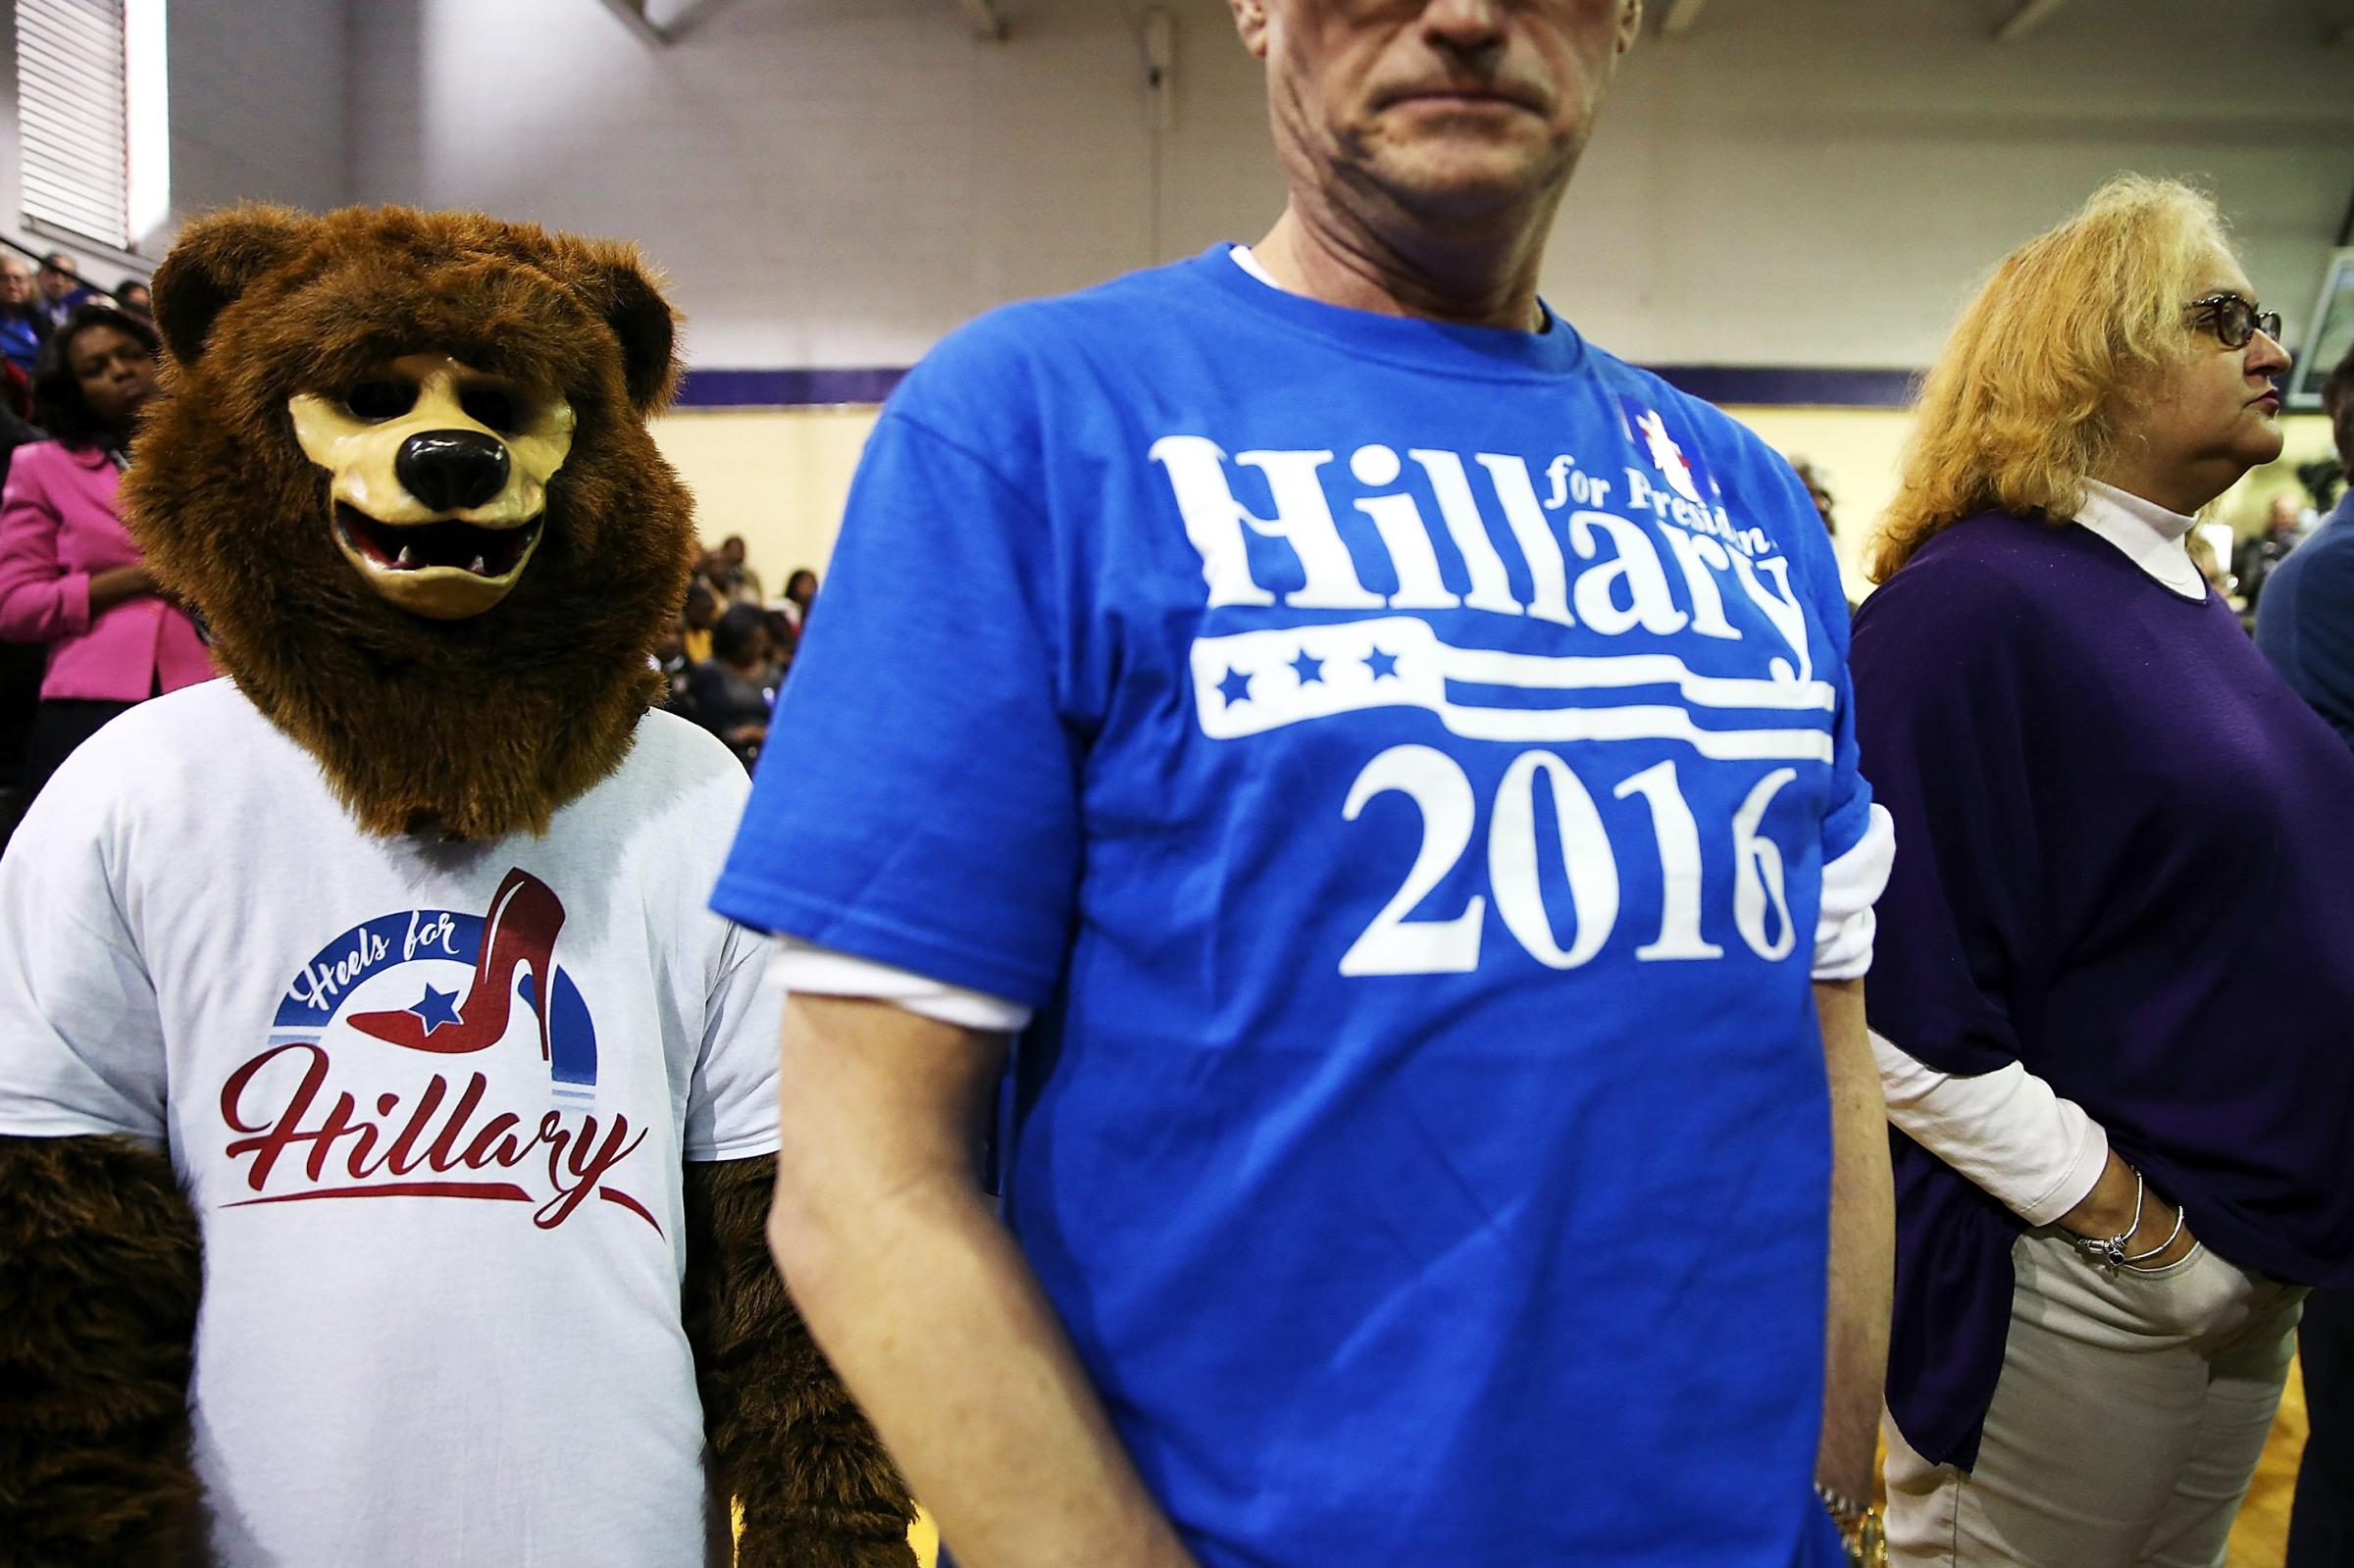 Hillary Clinton supporters attend a "Get Out The Vote" on Feb. 27 in Fairfield, Ala.